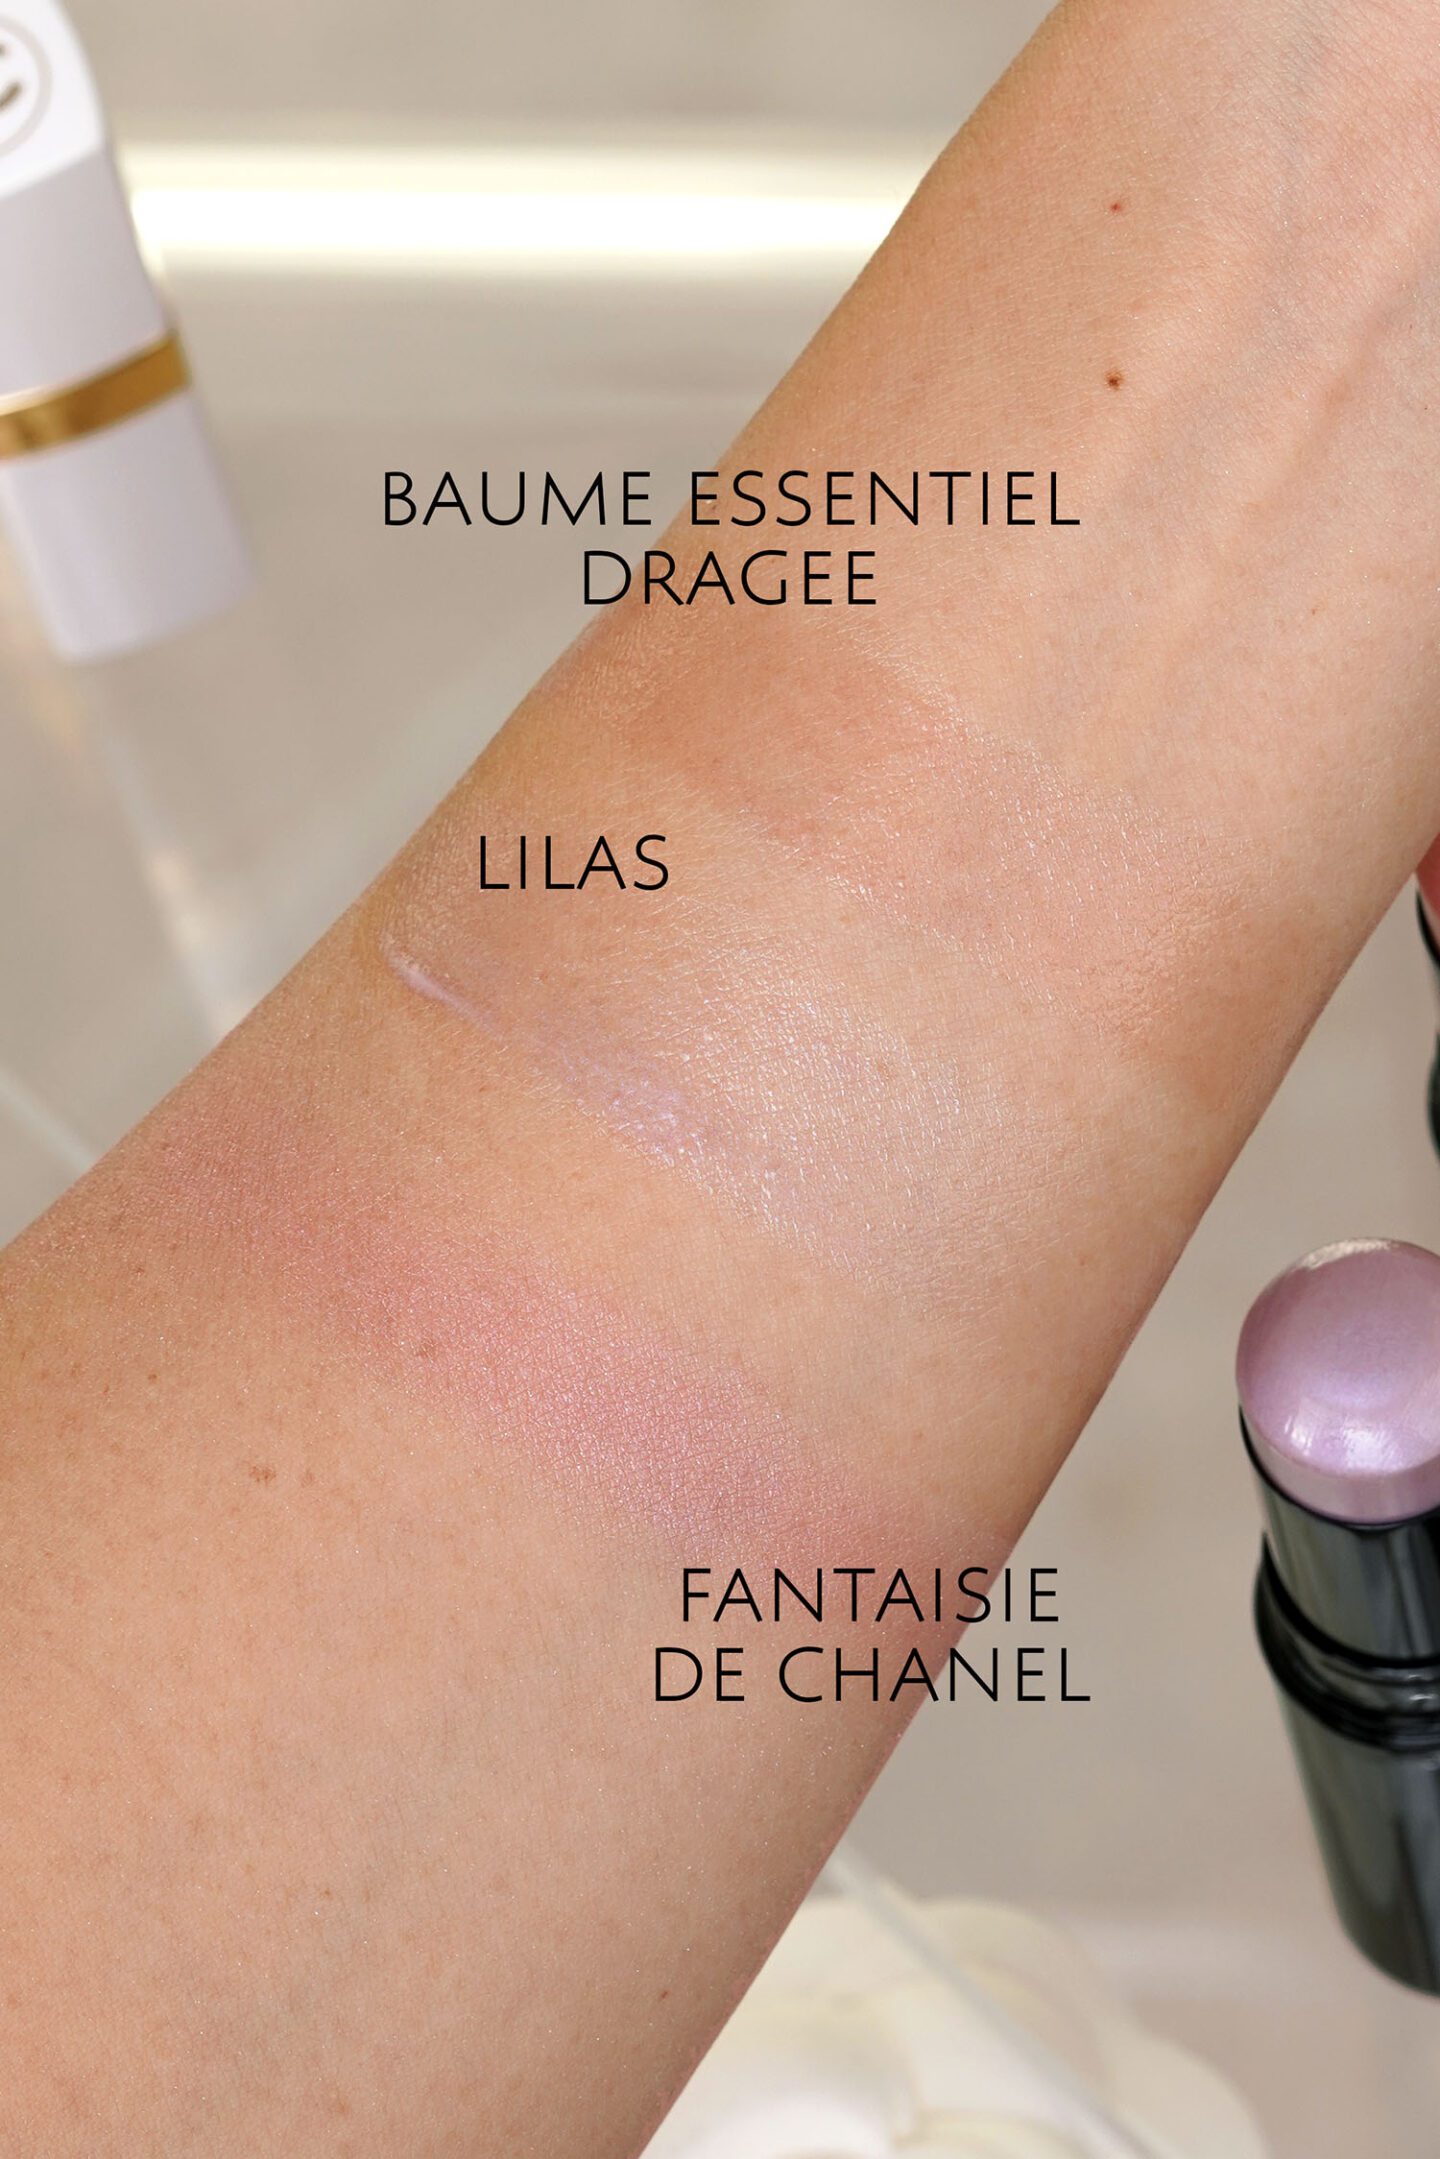 Chanel Baume Essentiel in Lilas and Dragee swatches